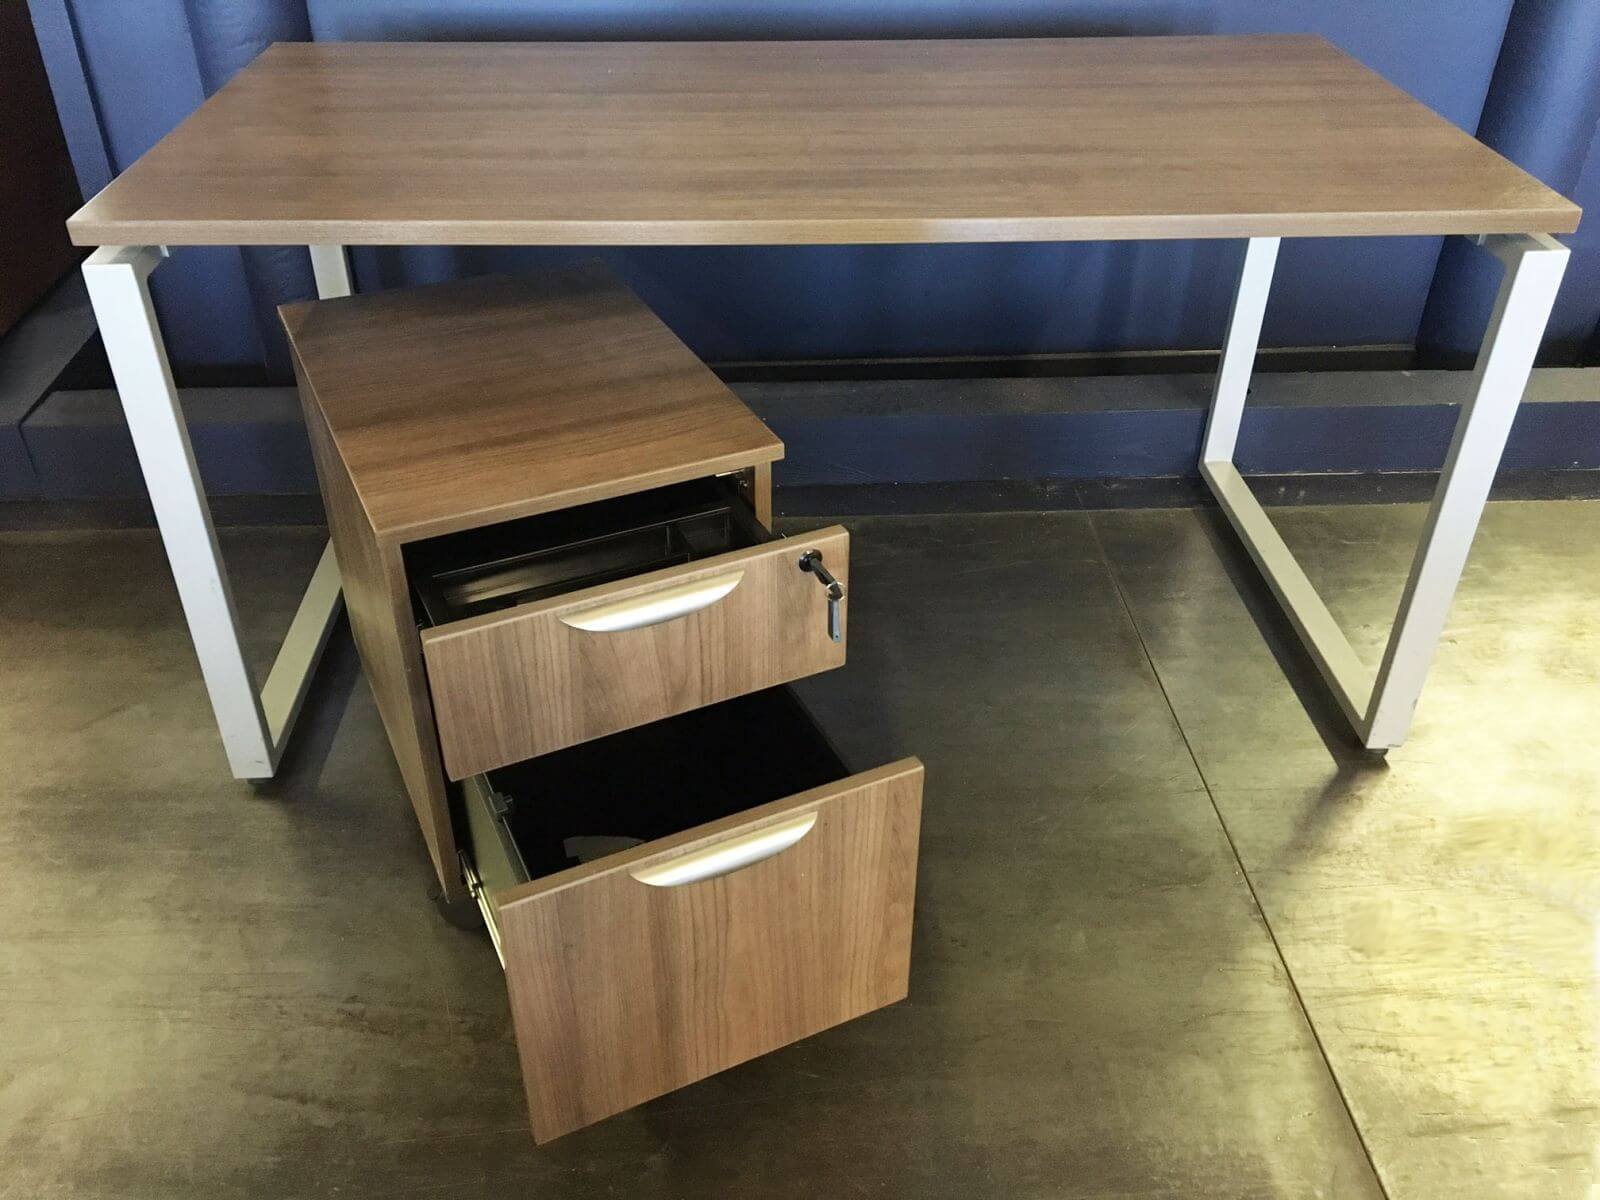 Used Office Desks - 2-drawer filing pedestal with locking included